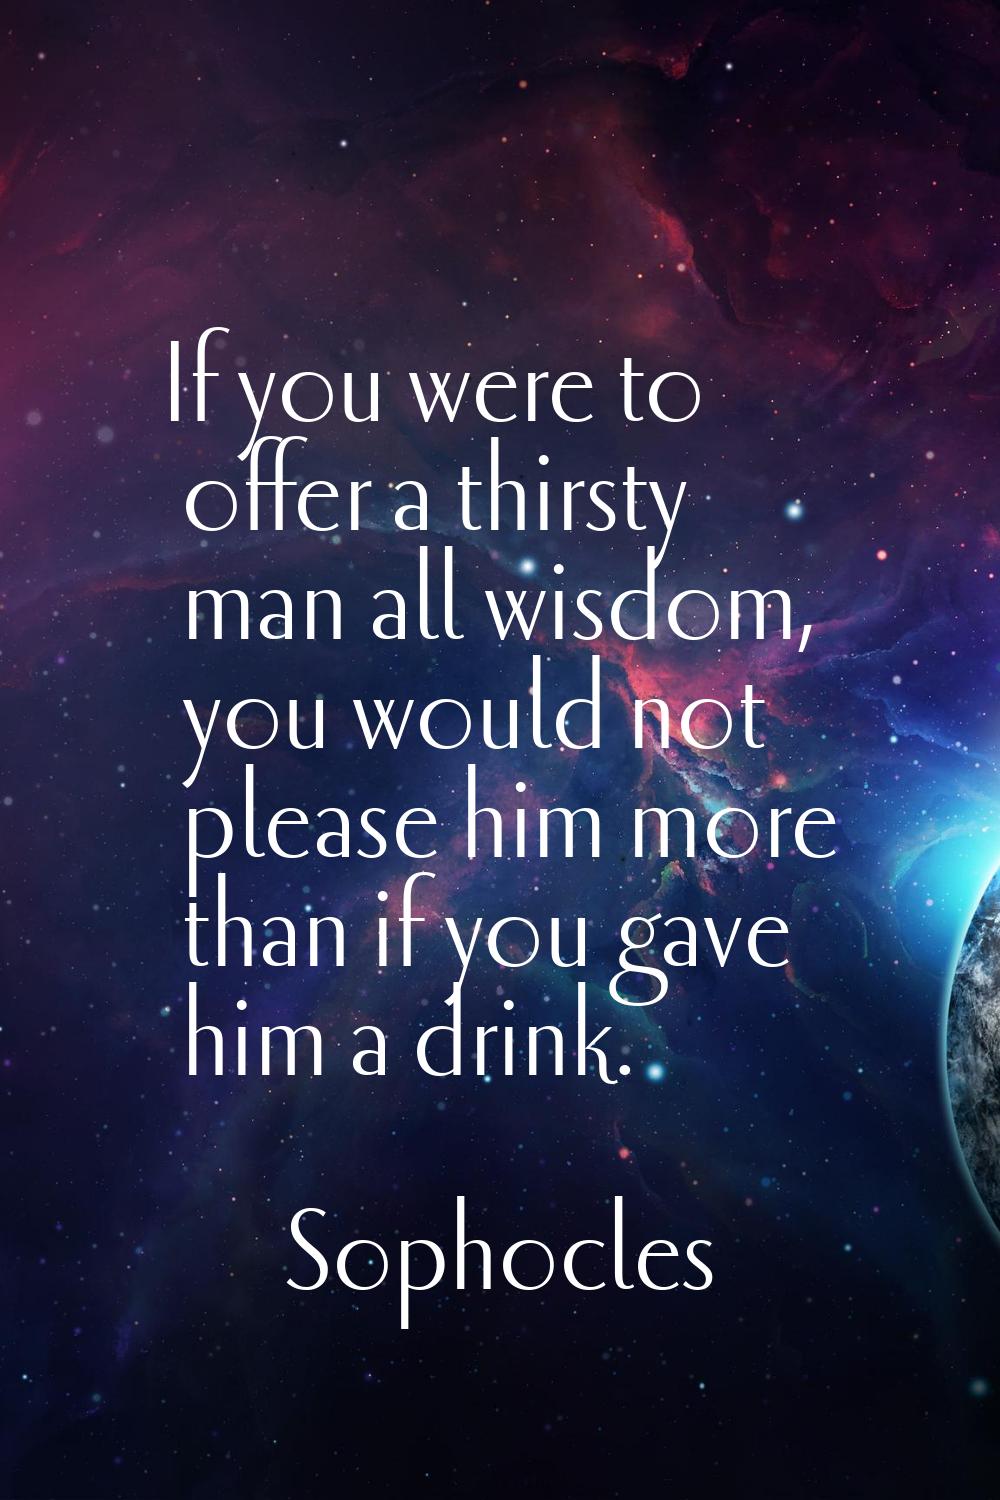 If you were to offer a thirsty man all wisdom, you would not please him more than if you gave him a